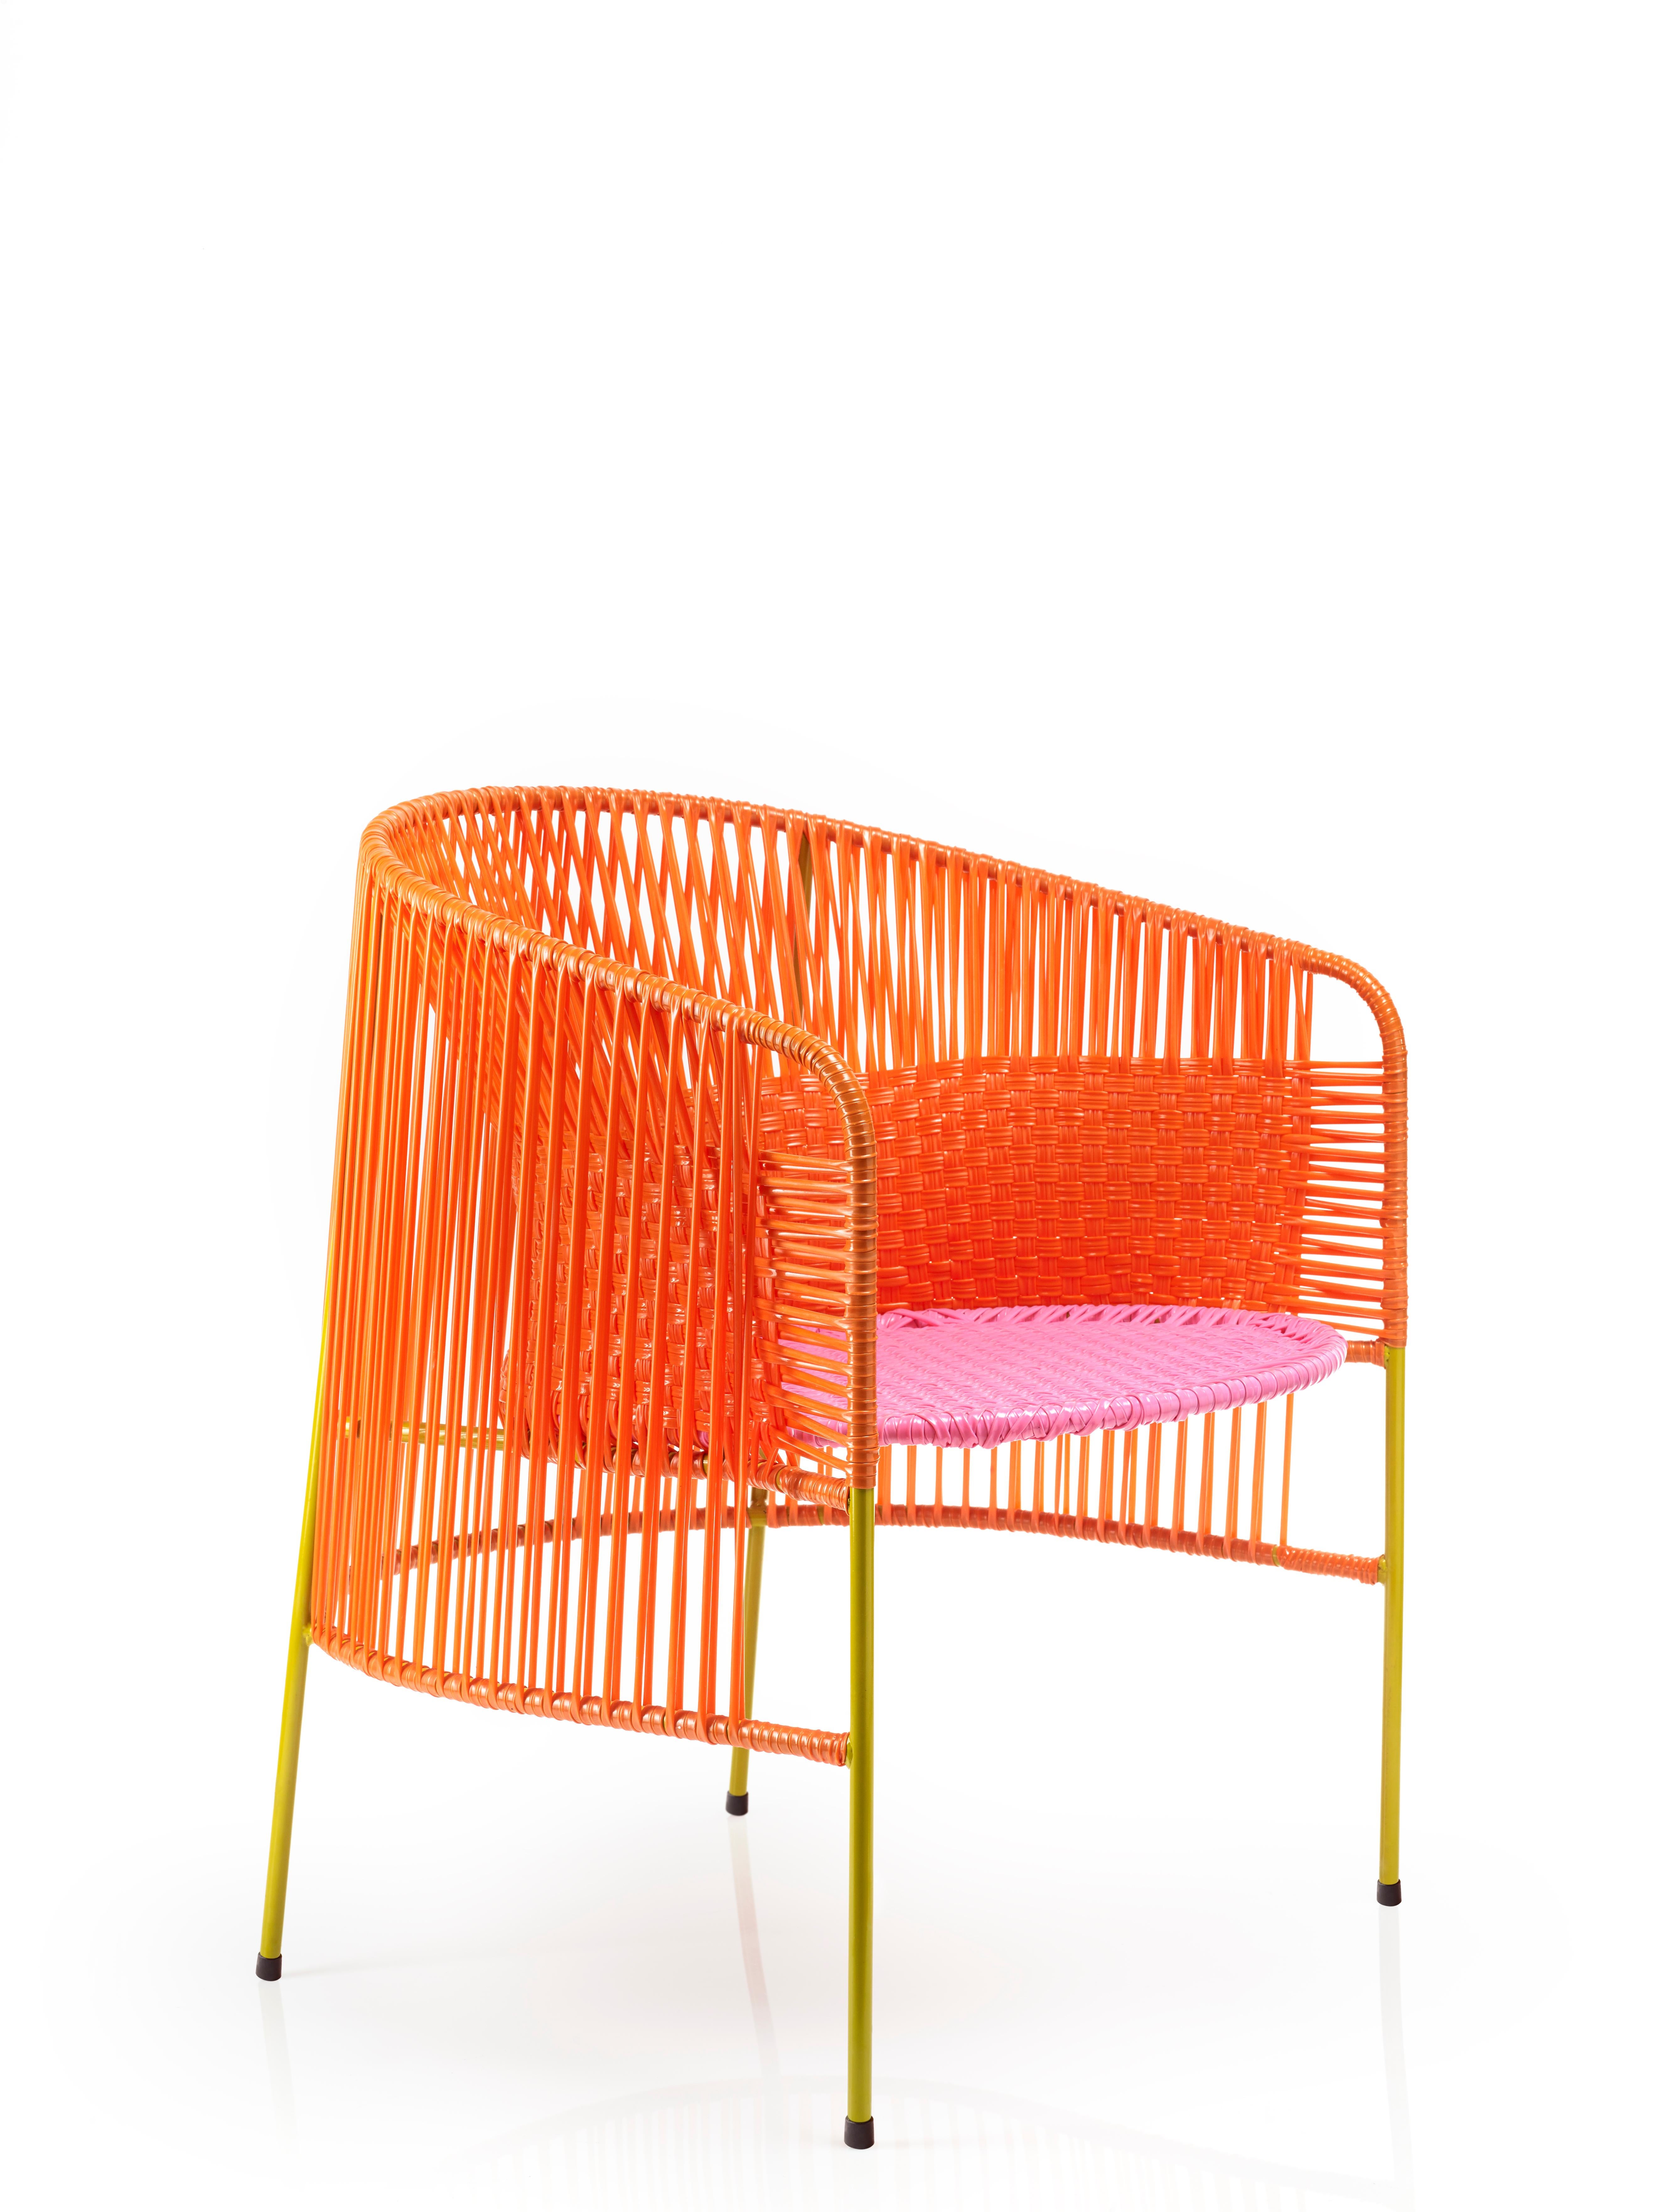 Set of 4 orange rose Caribe lounge chair by Sebastian Herkner.
Materials: galvanized and powder-coated tubular steel. PVC strings are made from recycled plastic.
Technique: made from recycled plastic and weaved by local craftspeople in Colombia.